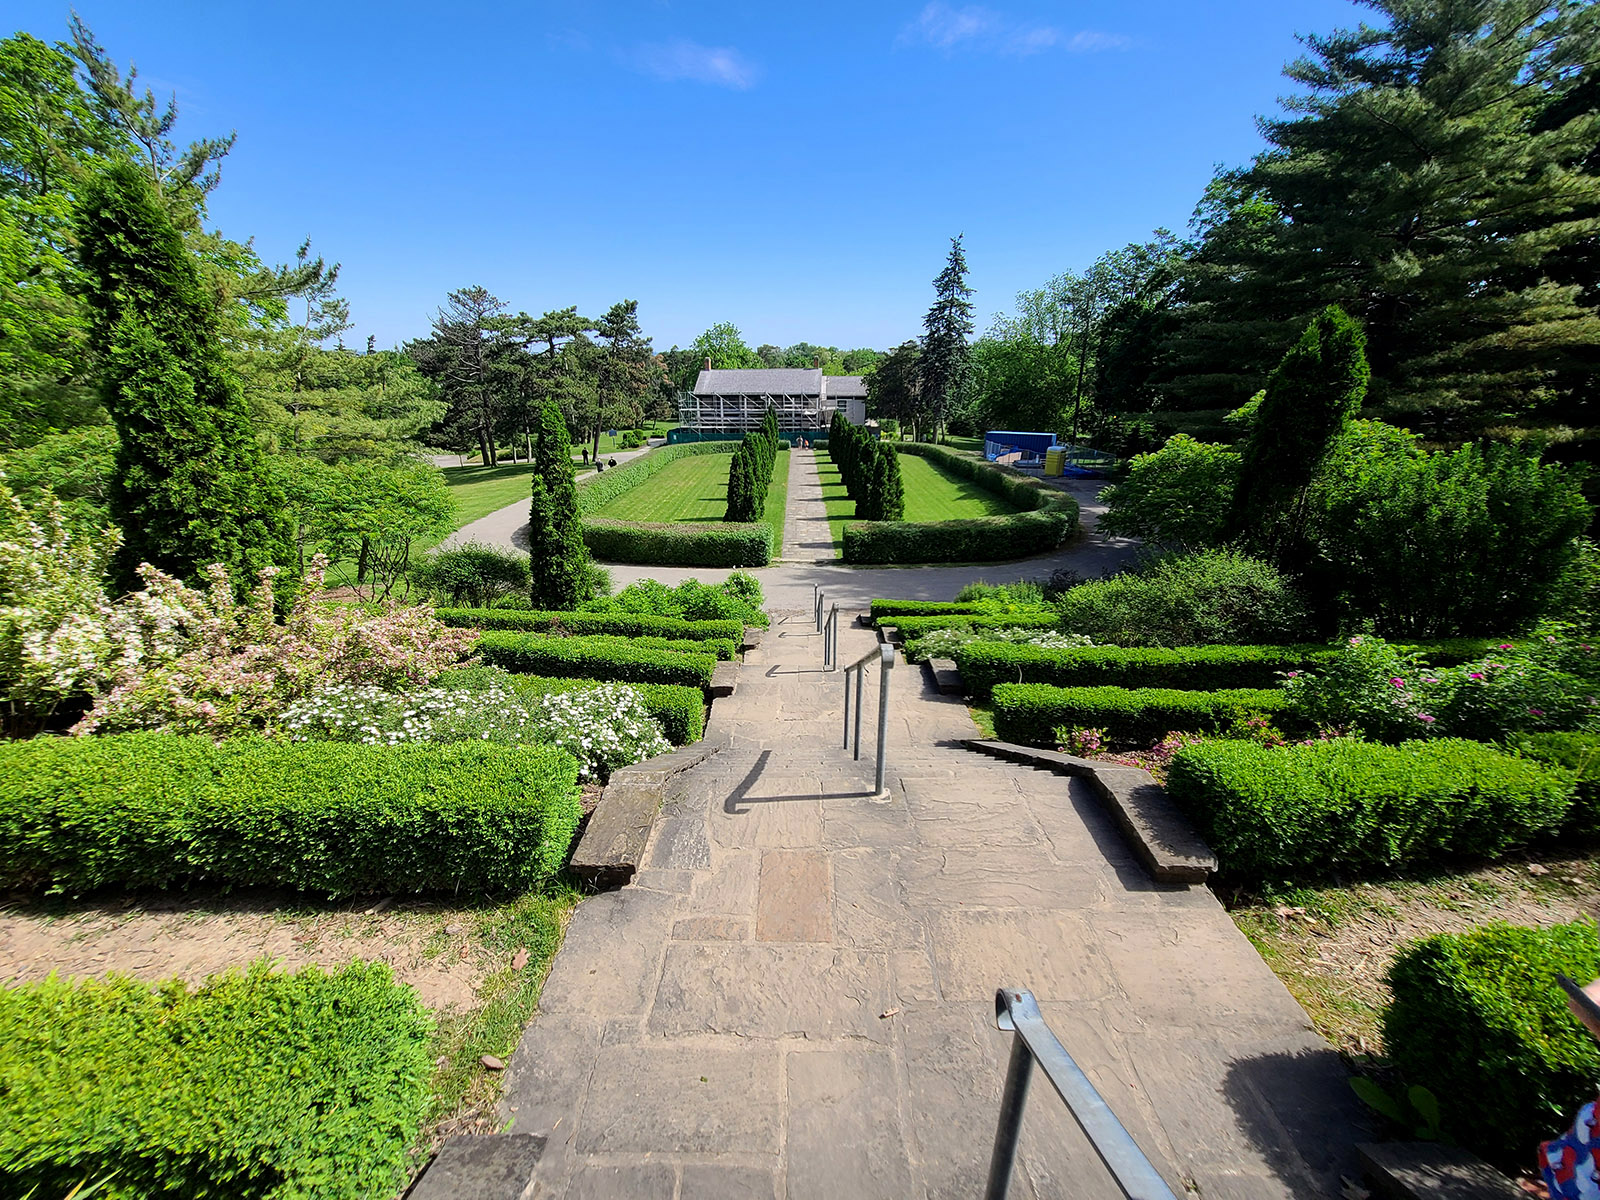 Looking down over the gardens at Battlefield Park.